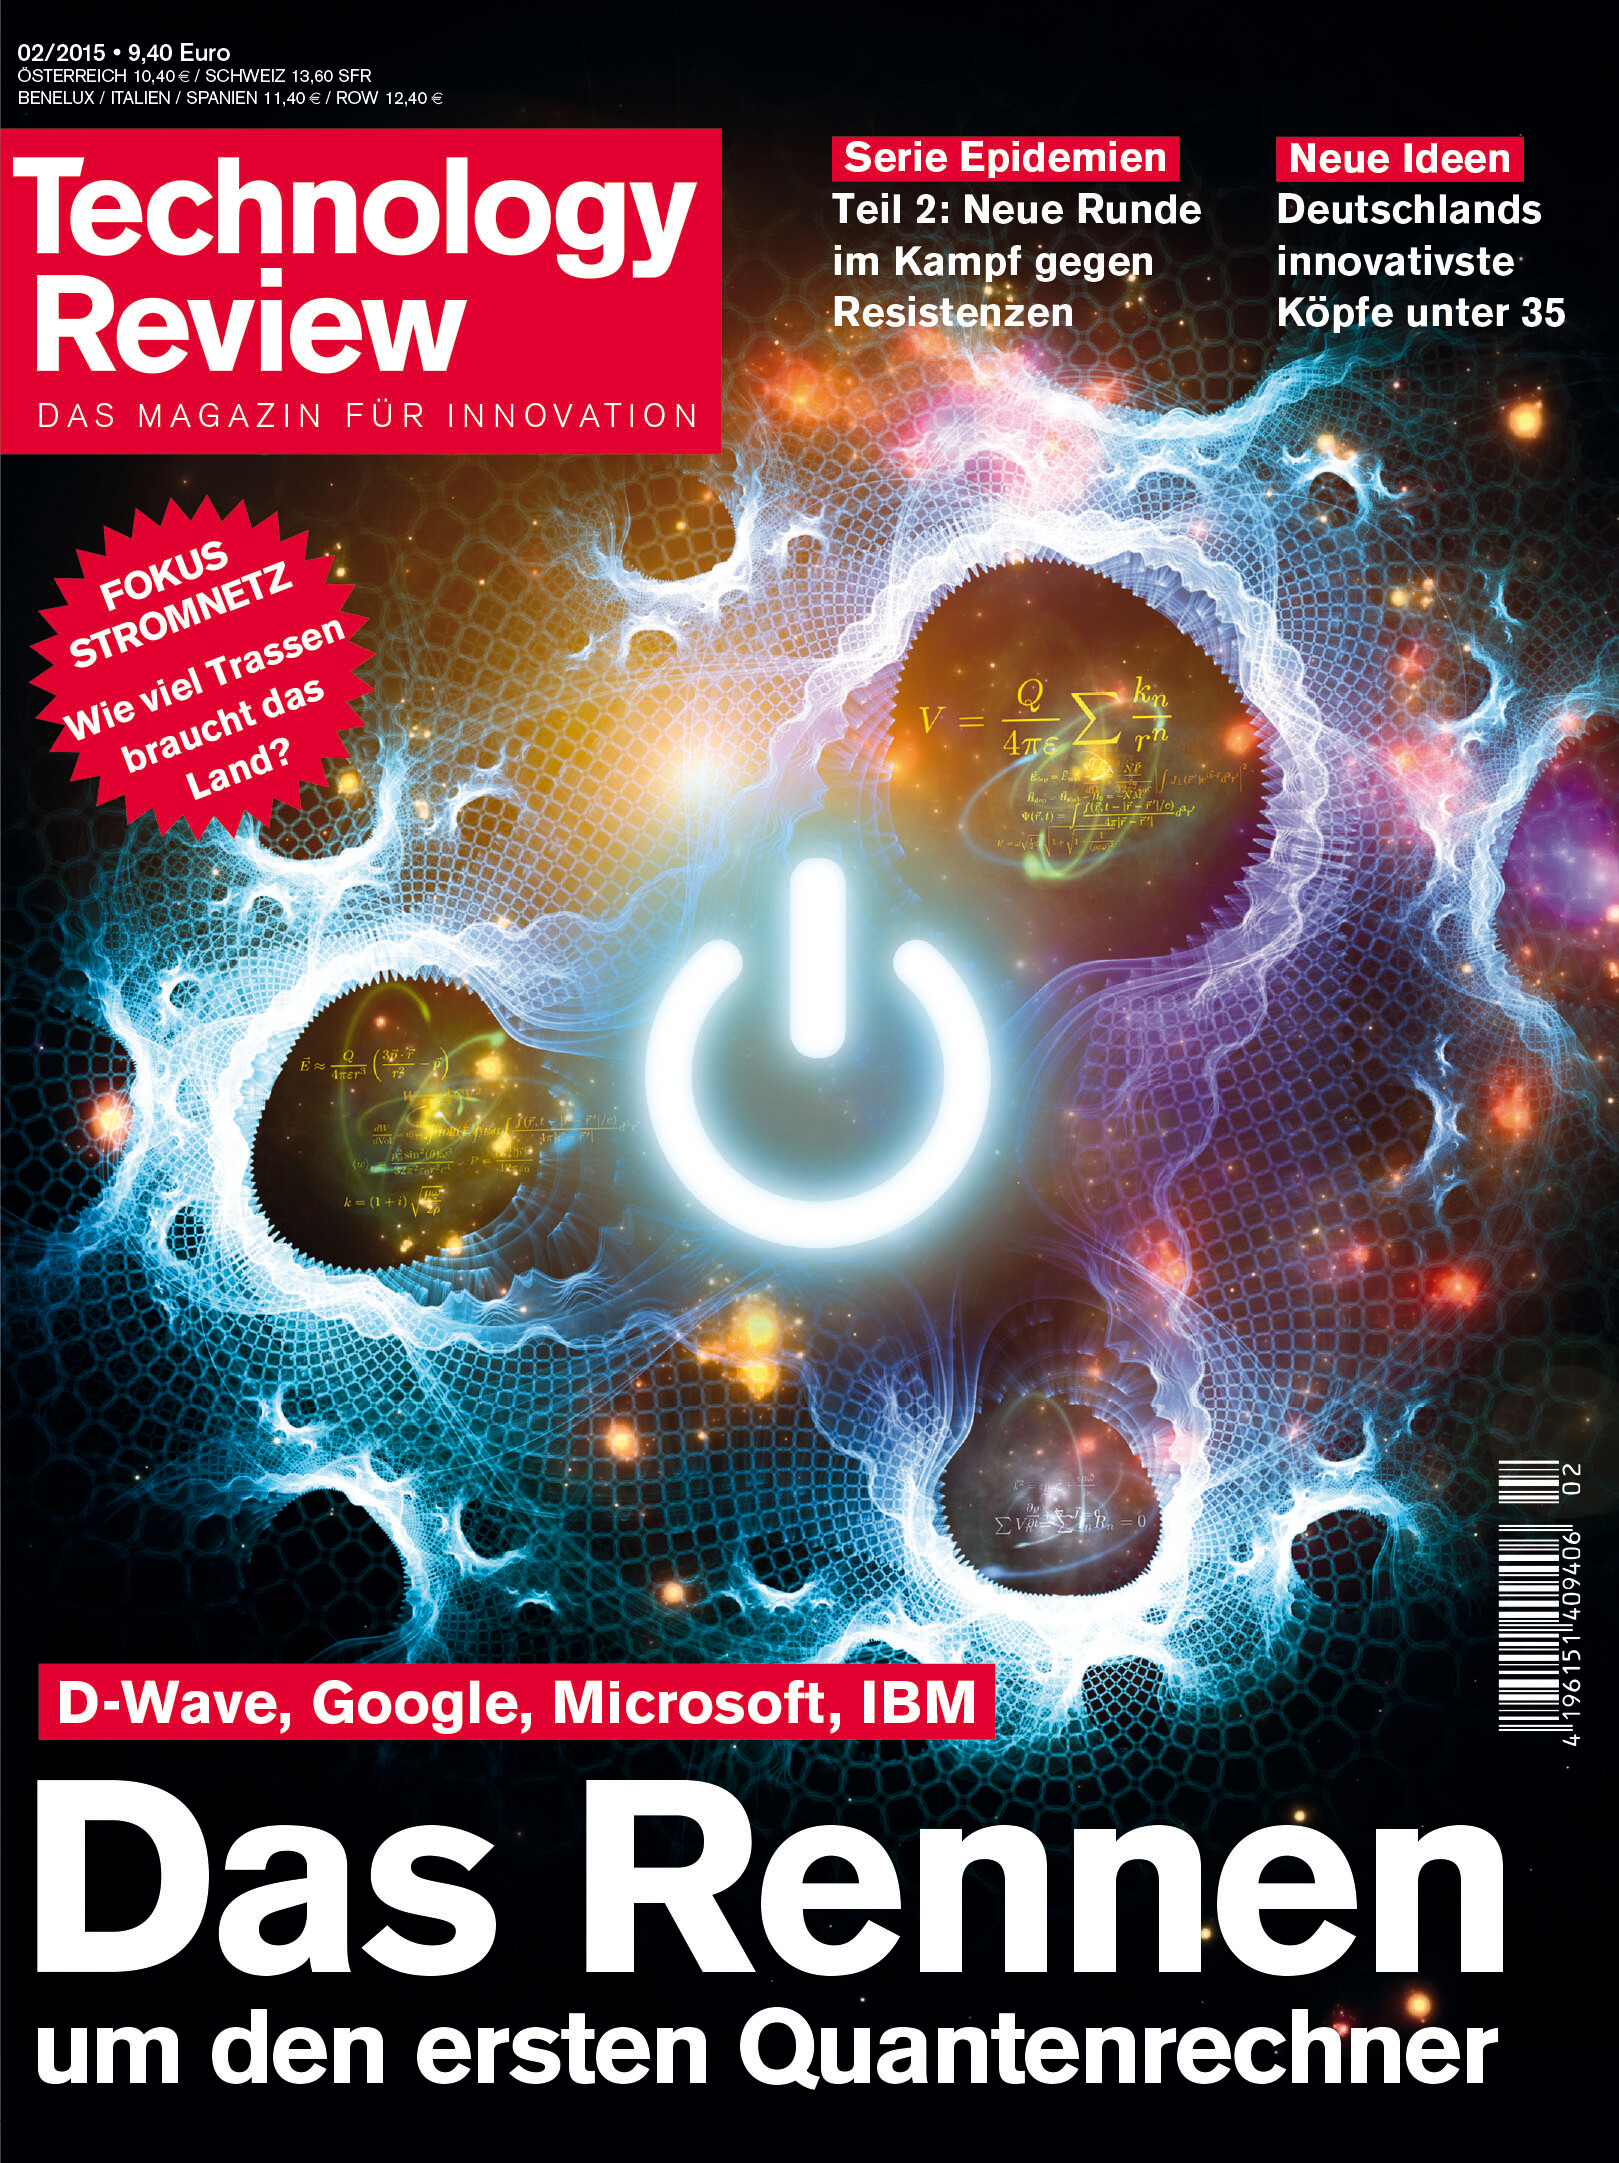 Technology Review 02/2015